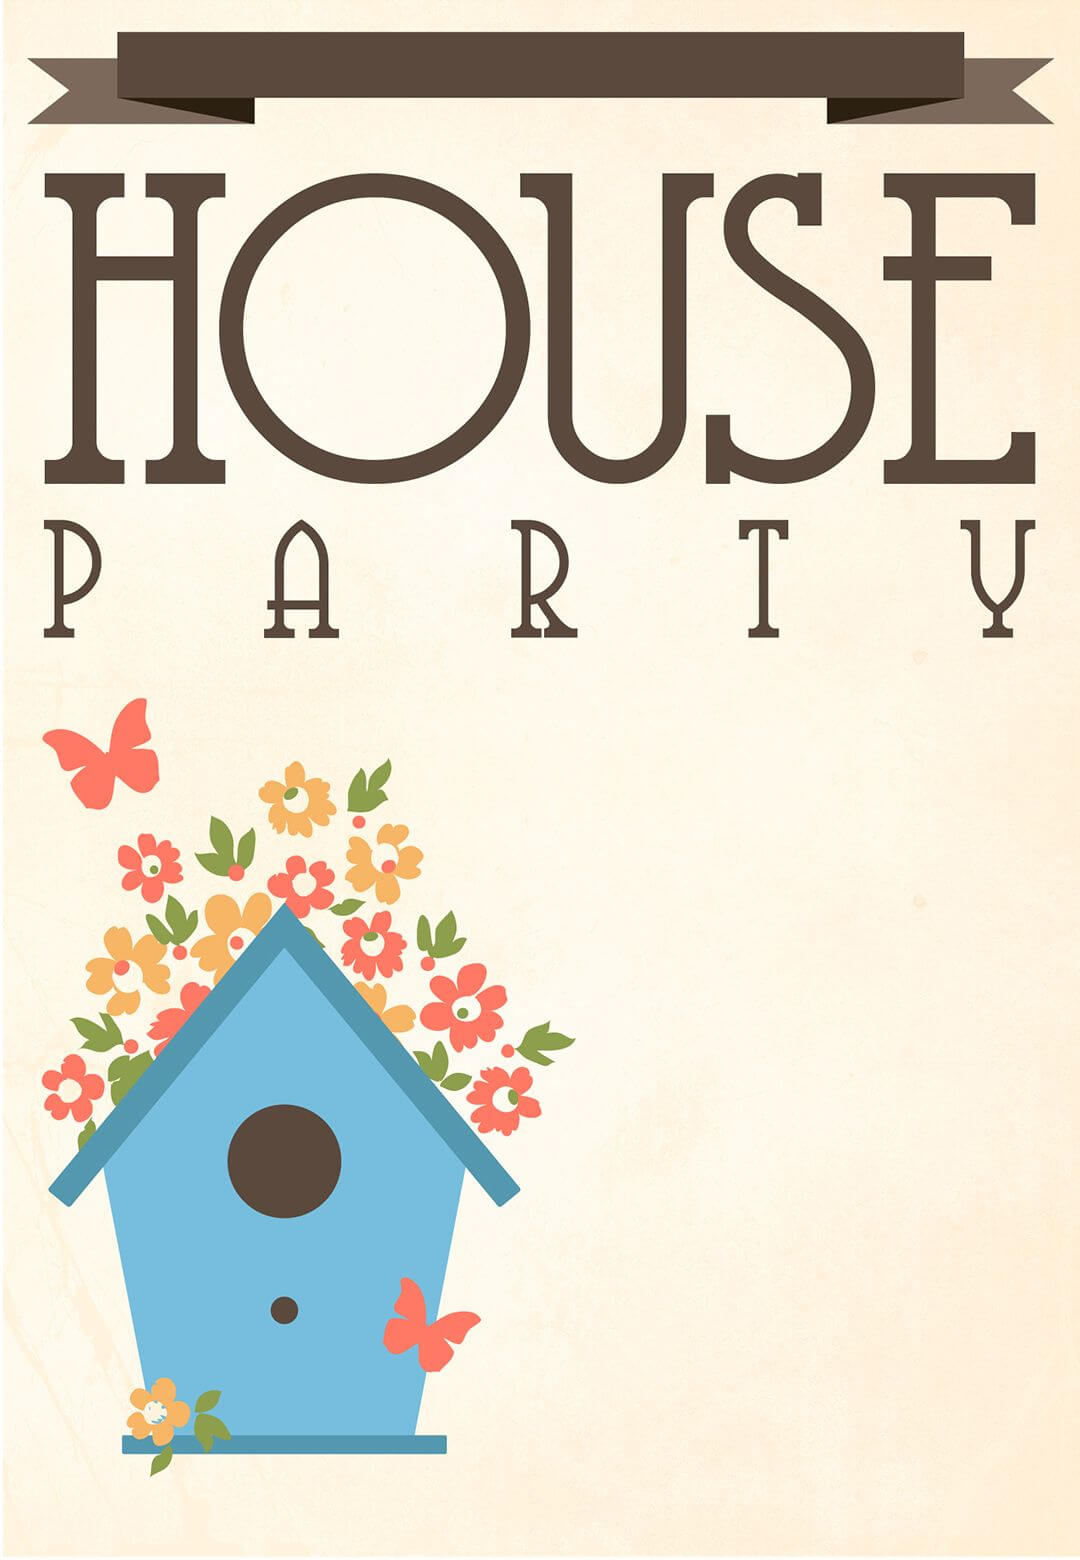 Free Printable House Party Invitation | Housewarming With Regard To Free Housewarming Invitation Card Template